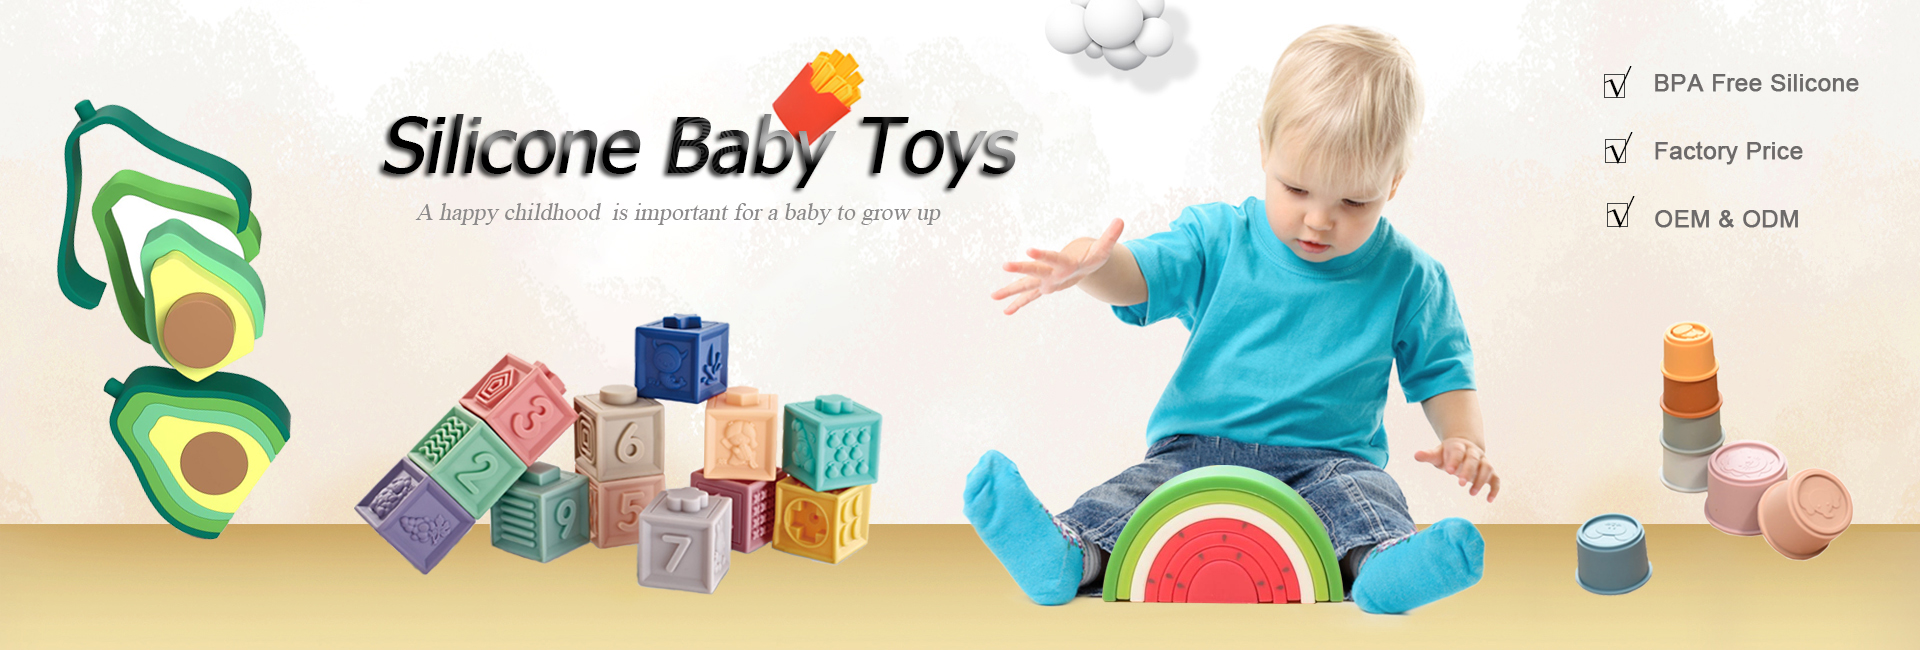 silicone baby toys soft building blocks set